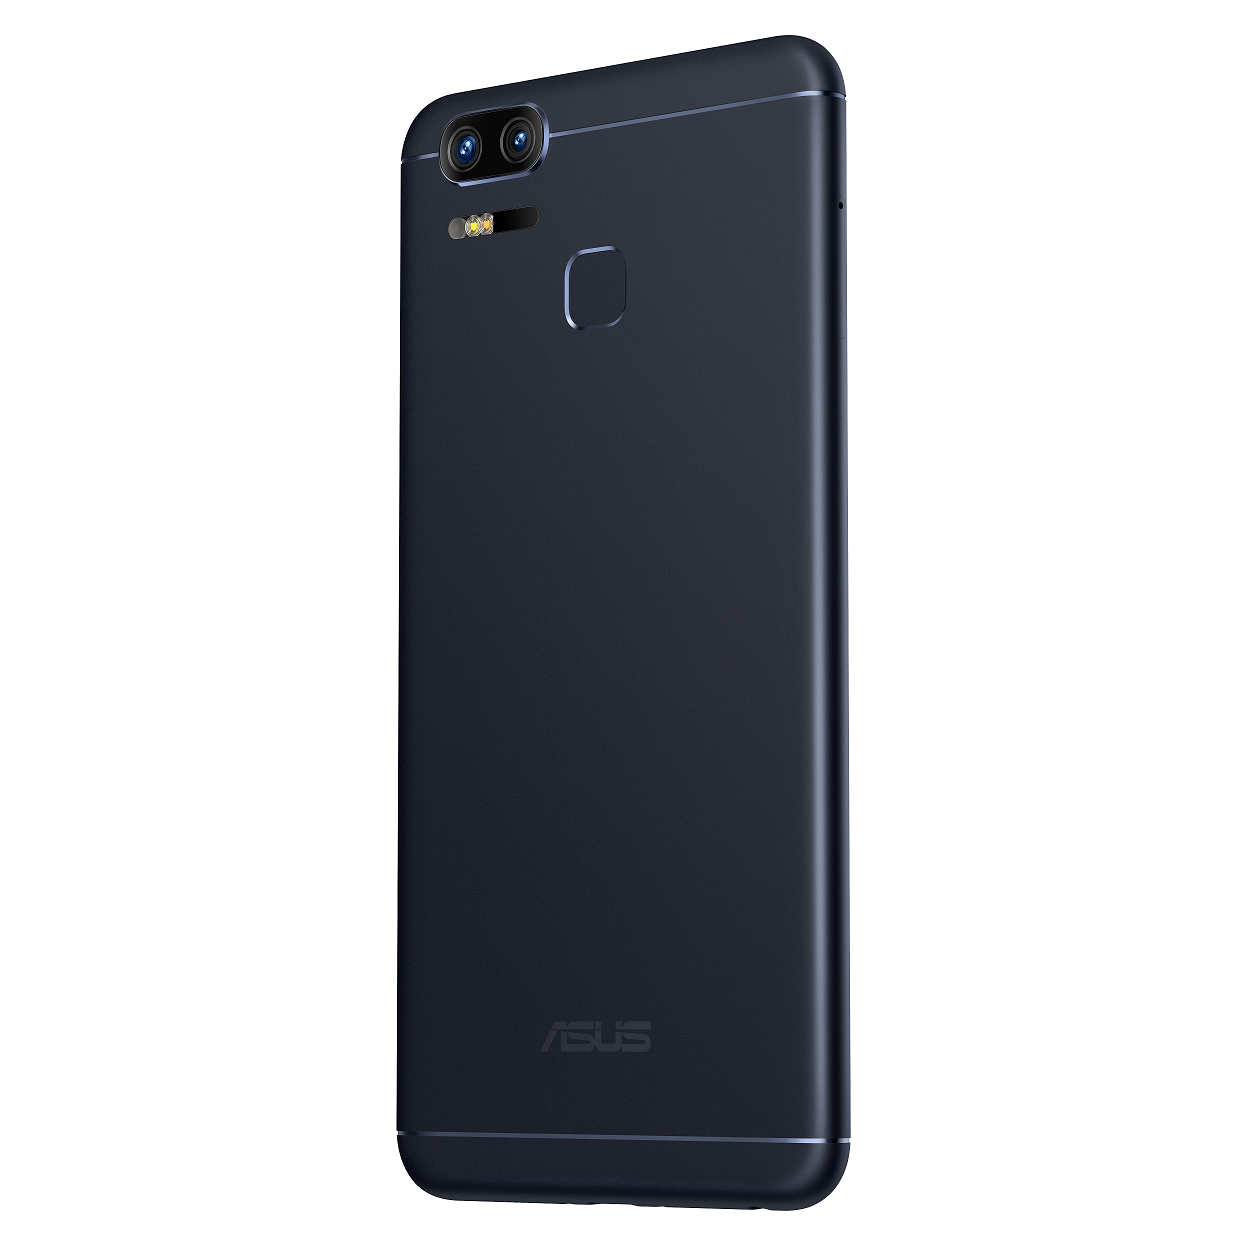 Asus launches camera focused Zenfone Zoom S at Rs. 26,999 2